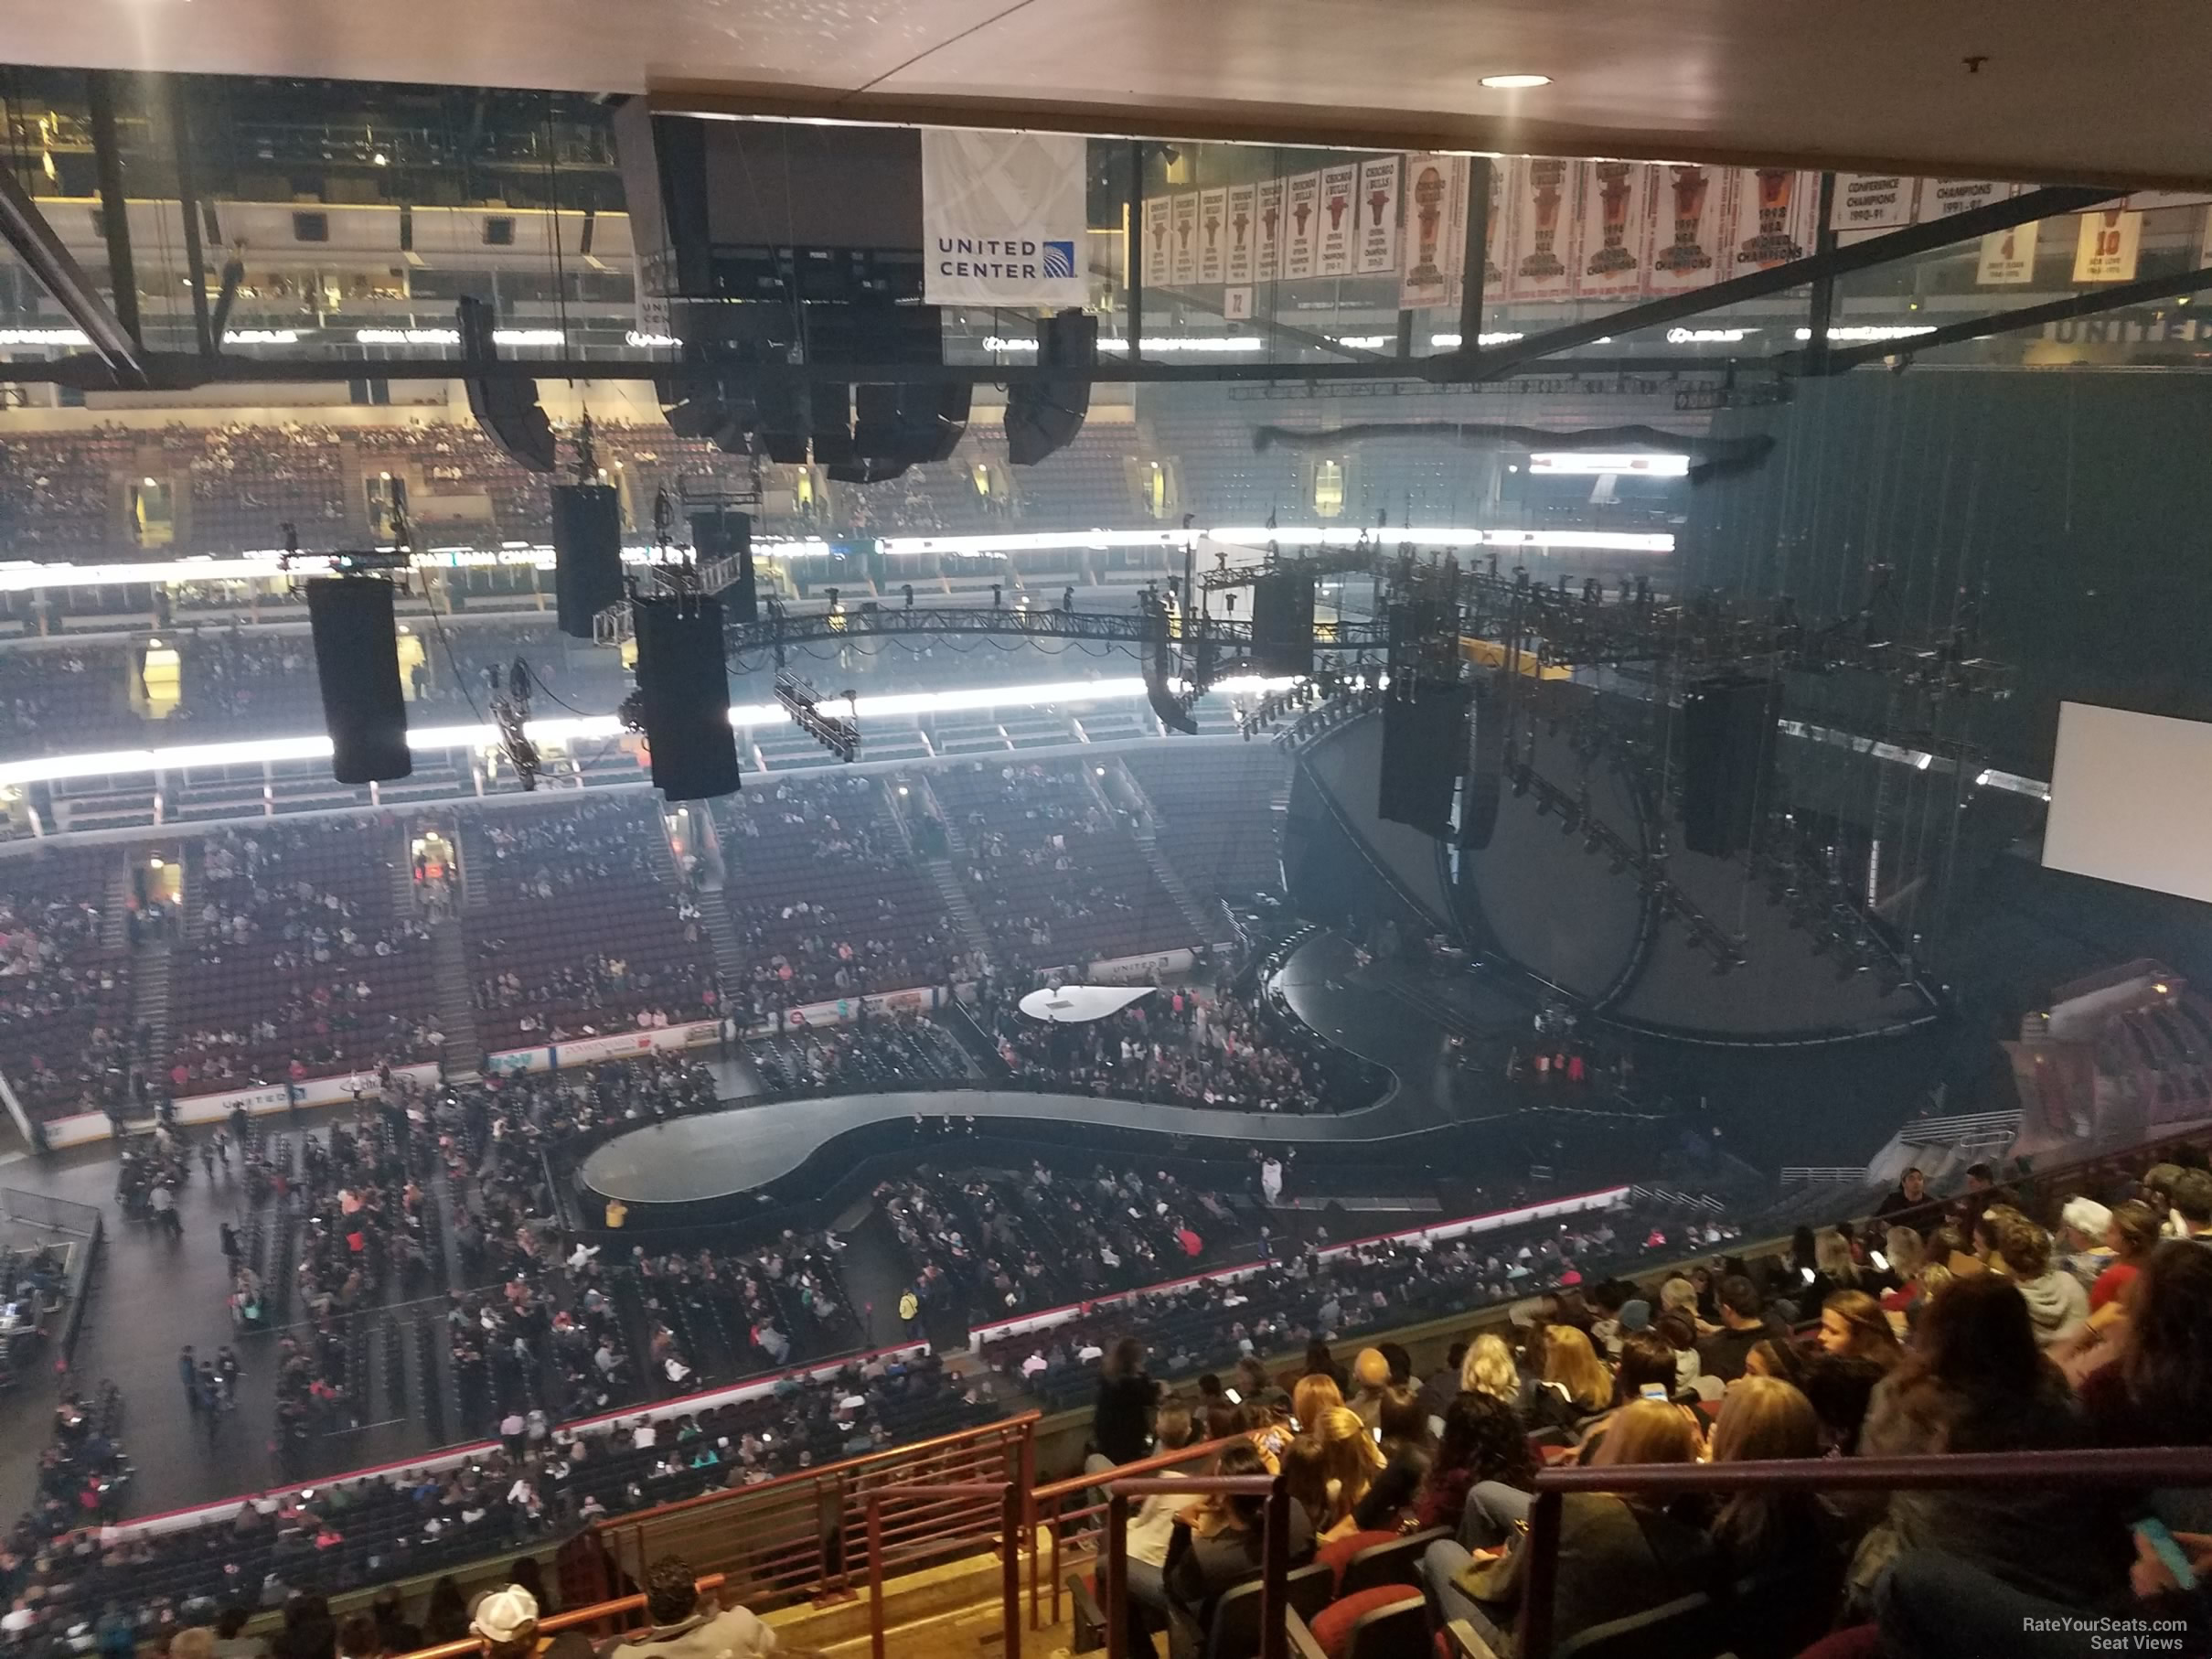 section 302, row 17 seat view  for concert - united center